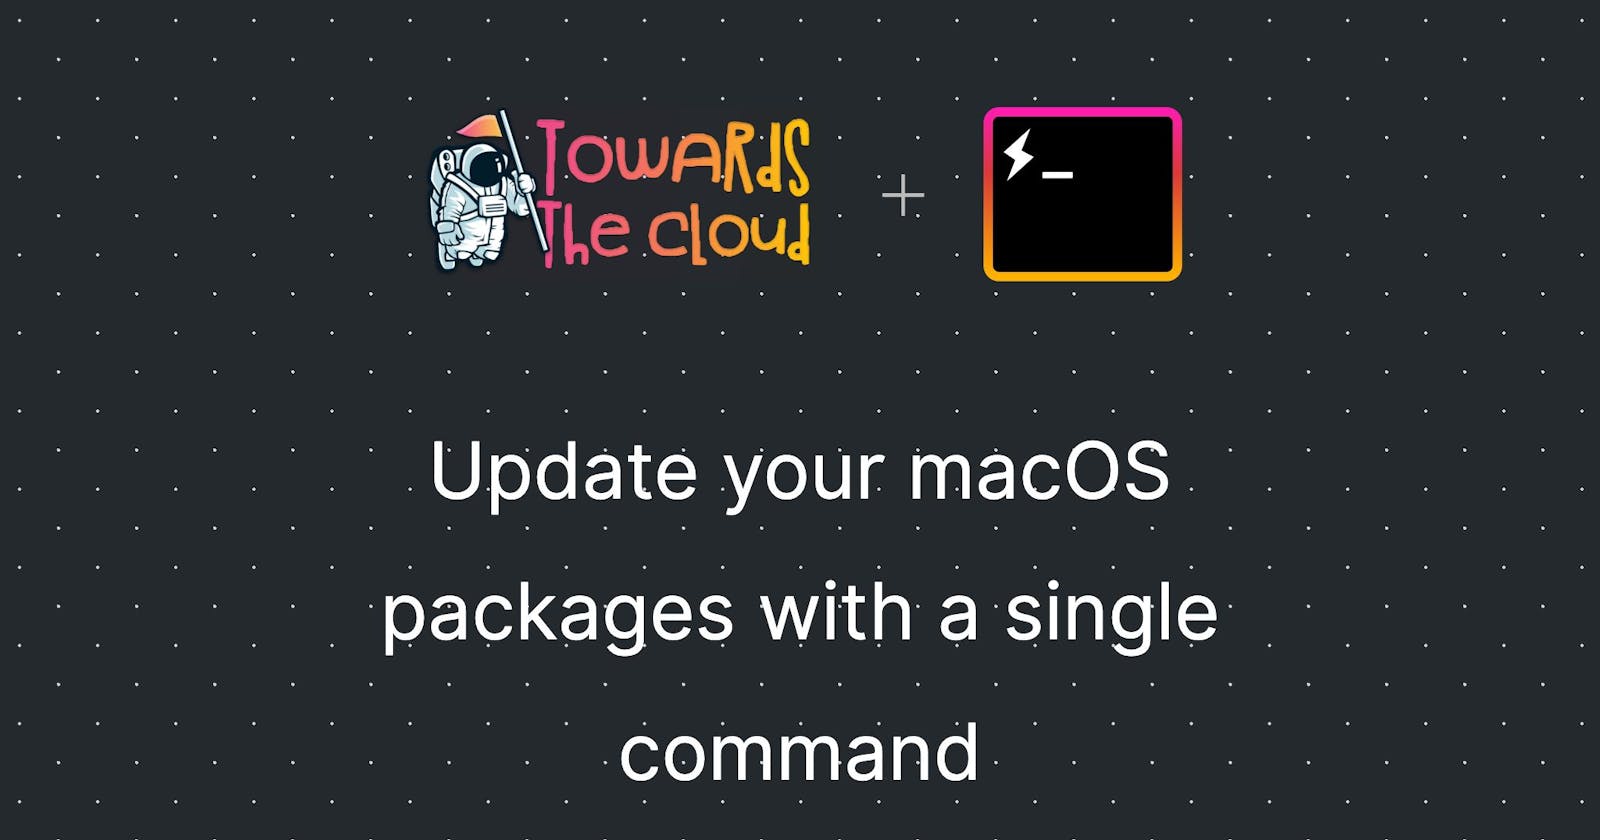 Update your macOS packages with a single command